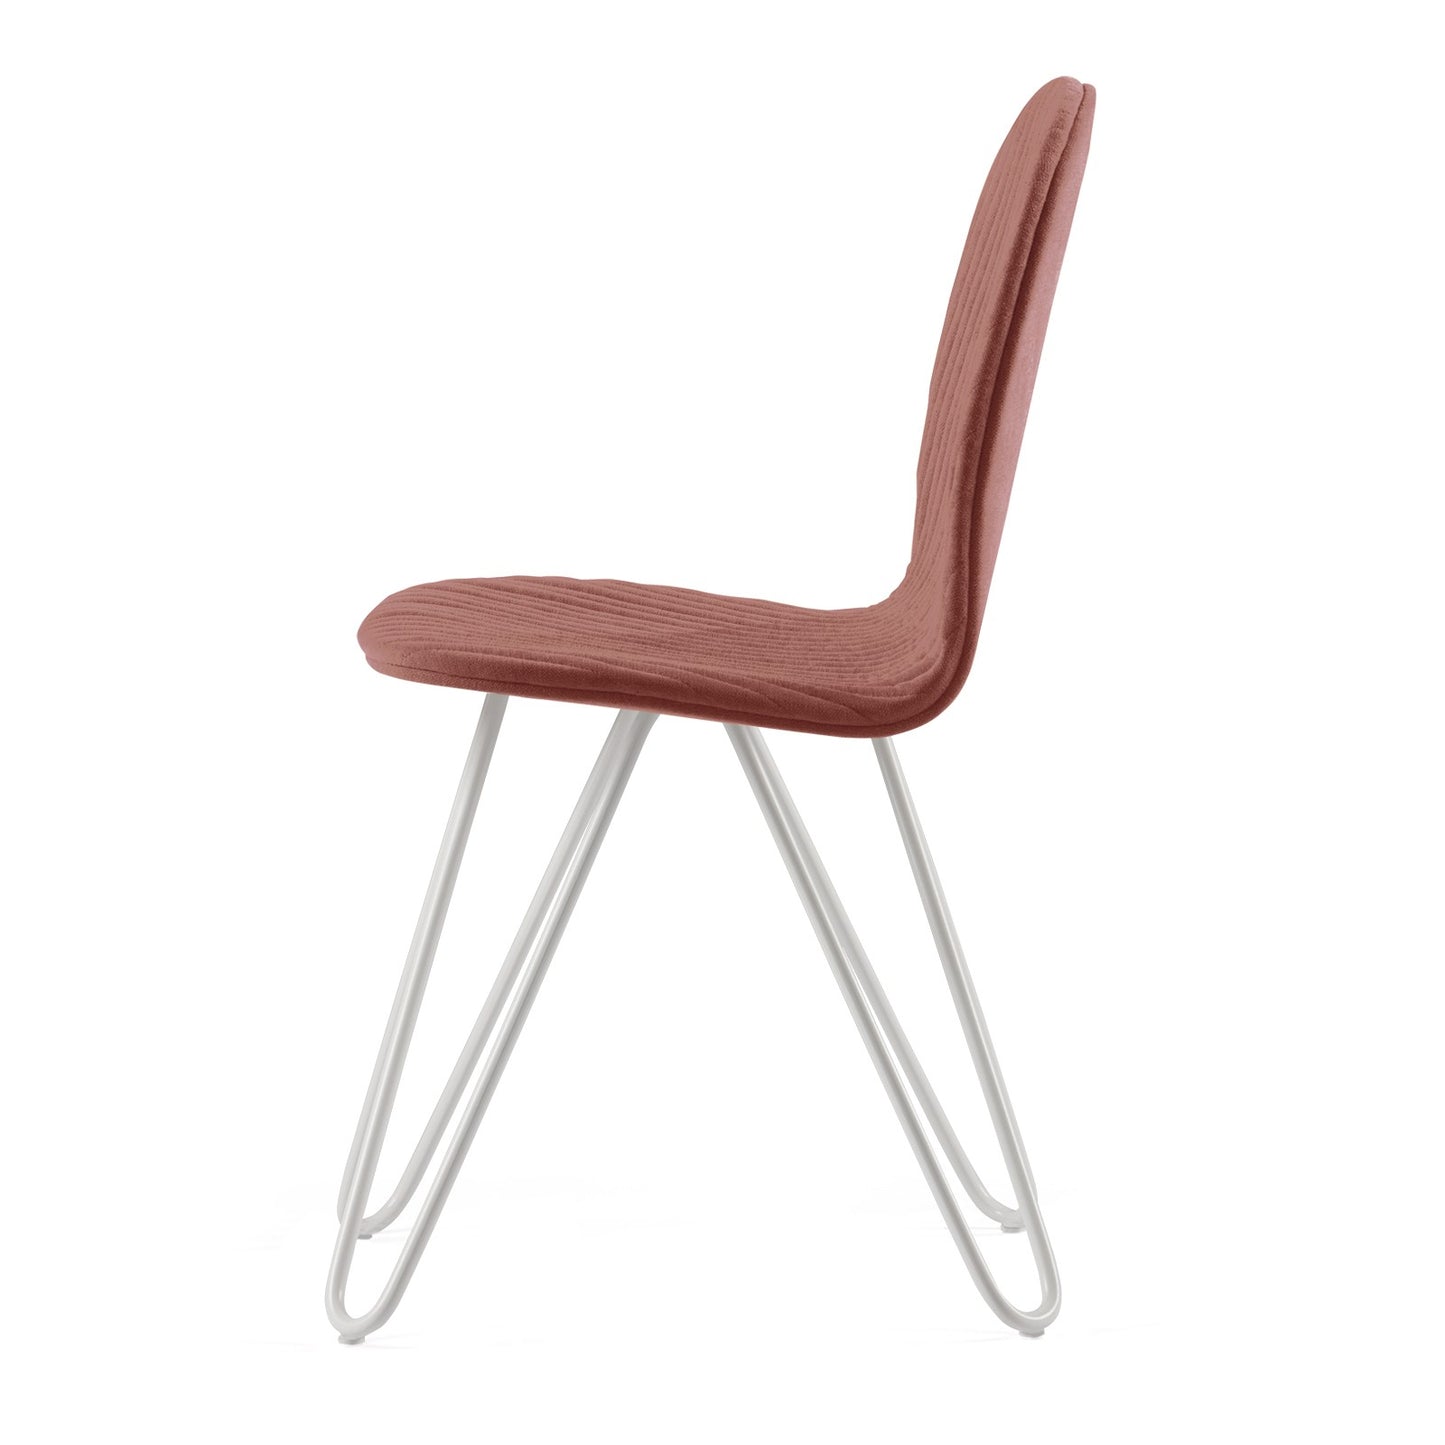 Chair Mannequin 03 - Coral